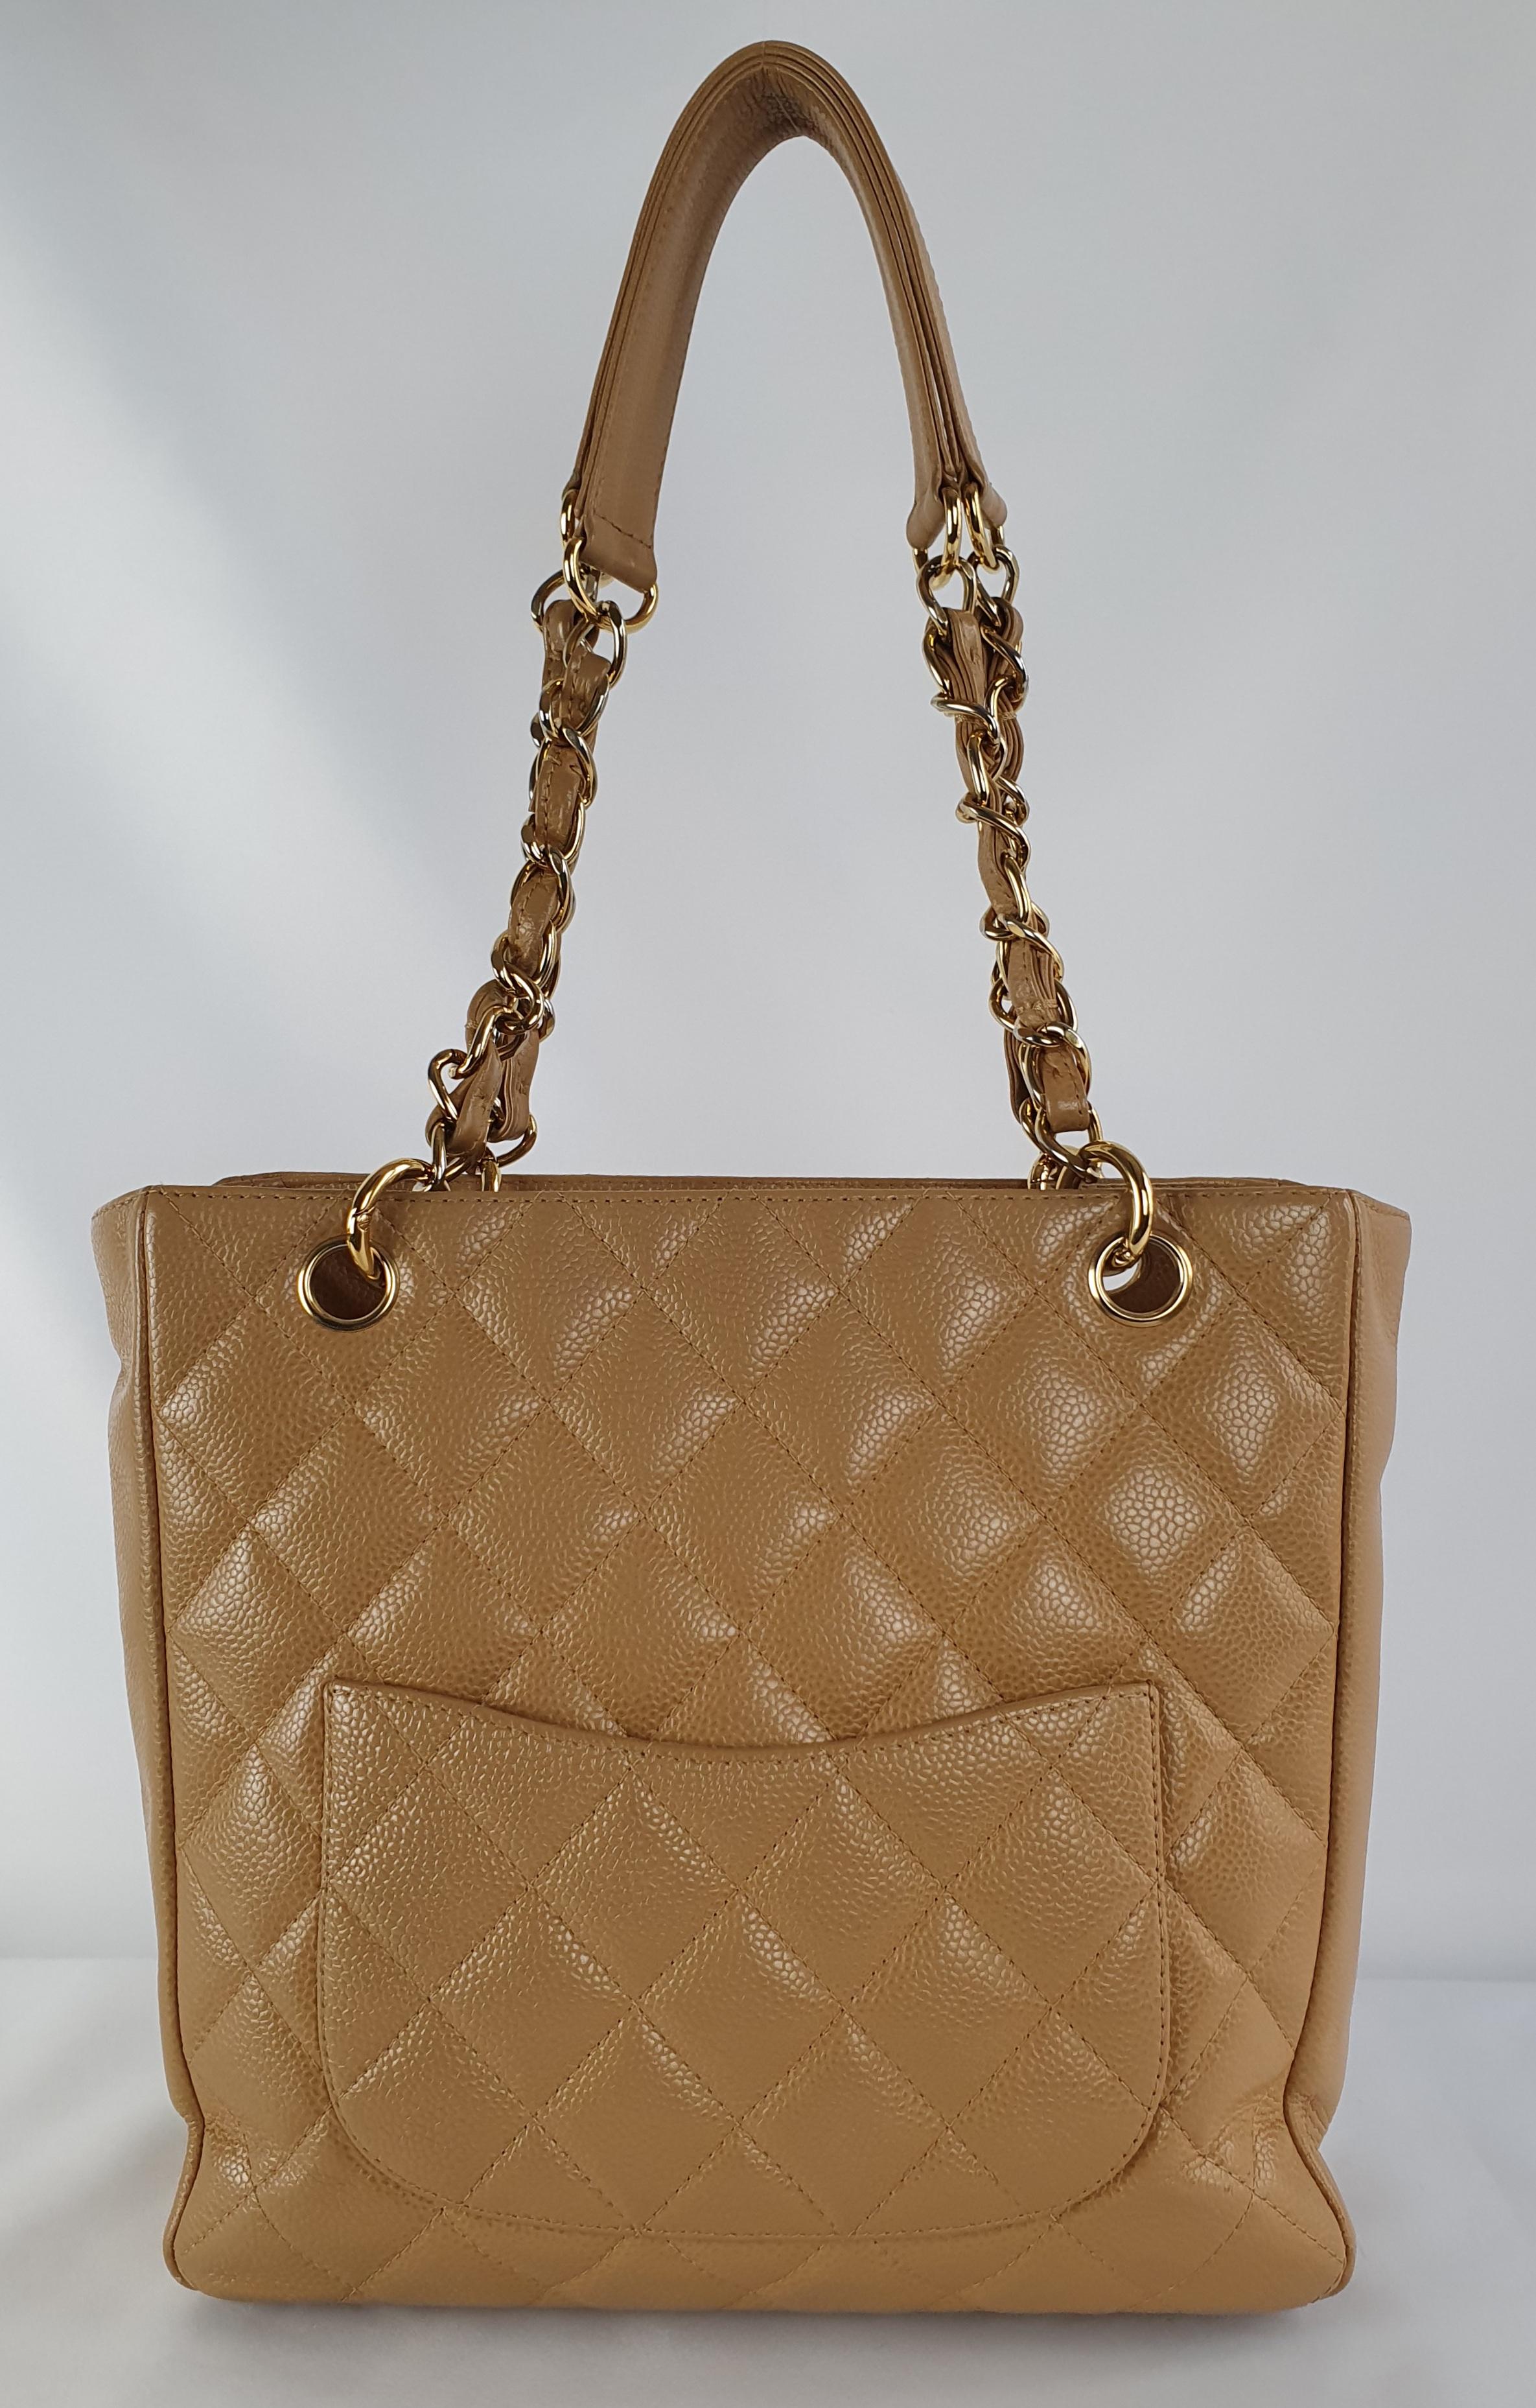 - Designer: CHANEL
- Model: Shopping bag
- Condition: Very good condition. Minor sign of wear on base corners, Scratches on hardware, Sign of wear on Leather
- Accessories: None
- Measurements: Width: 24cm , Height: 23cm , Depth: 8cm 
- Exterior